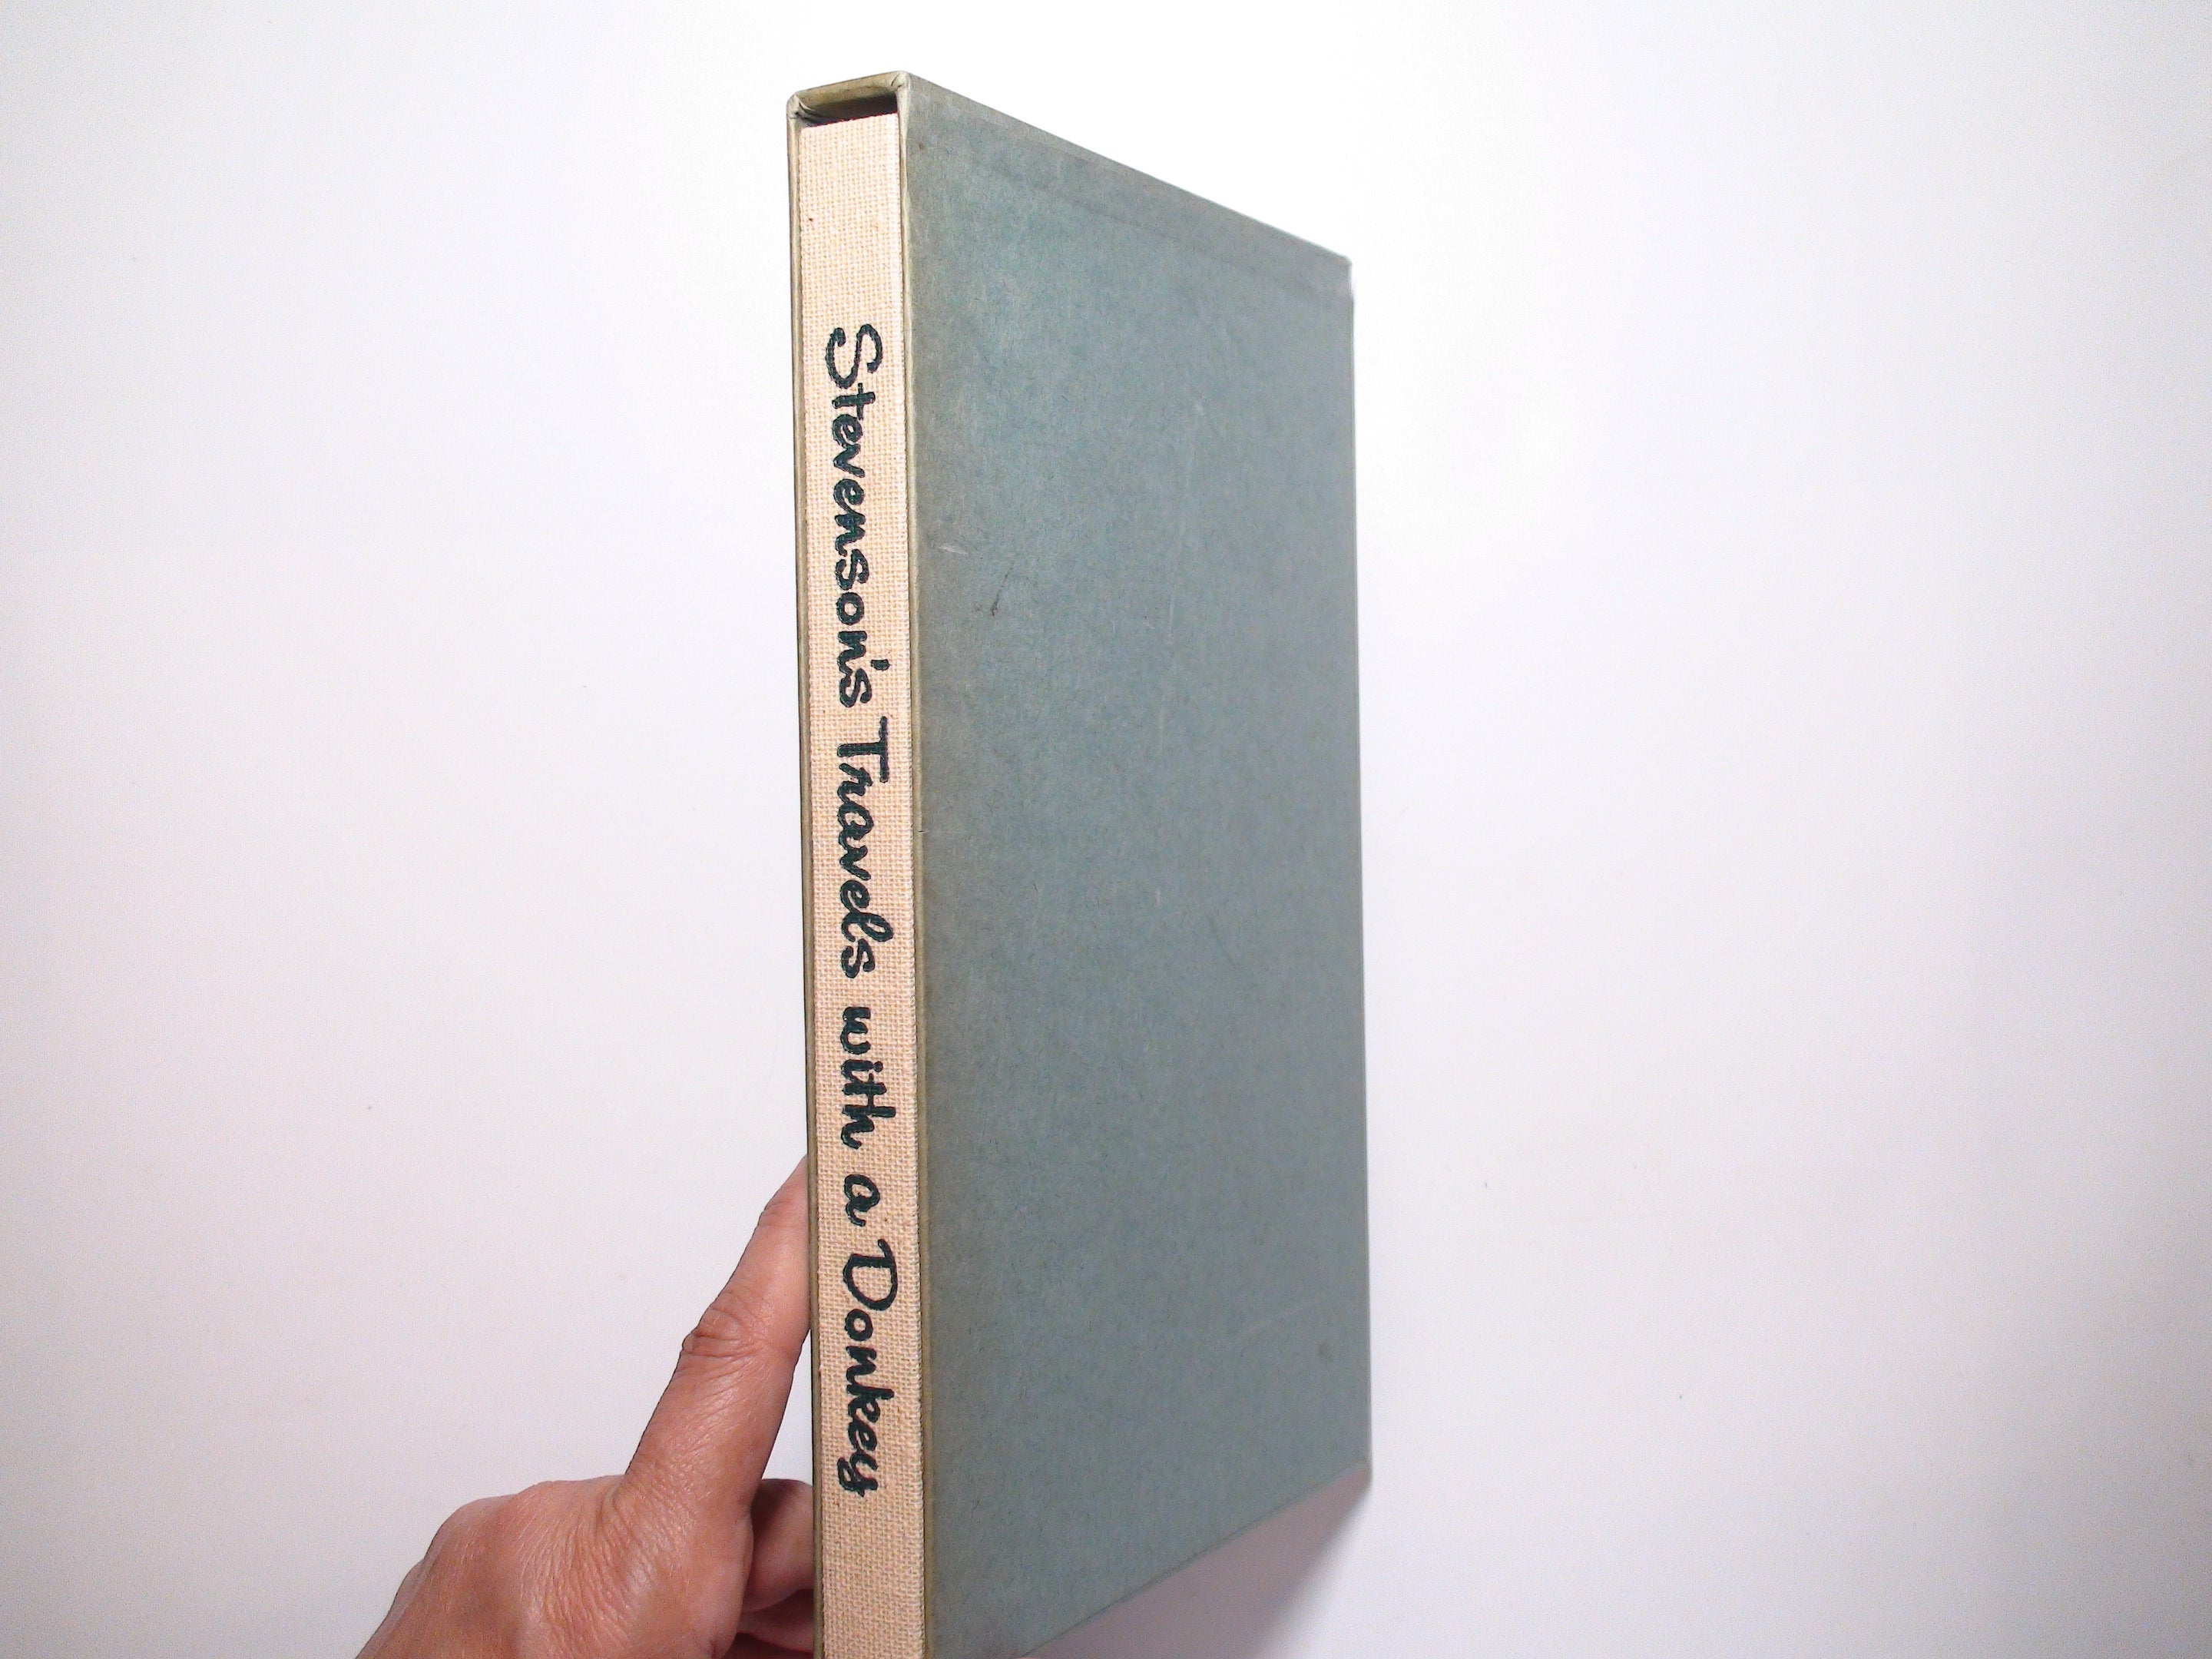 Travels With A Donkey, by Robert Louis Stevenson, 1st Ed, Slipcase, Illustrated, 1957